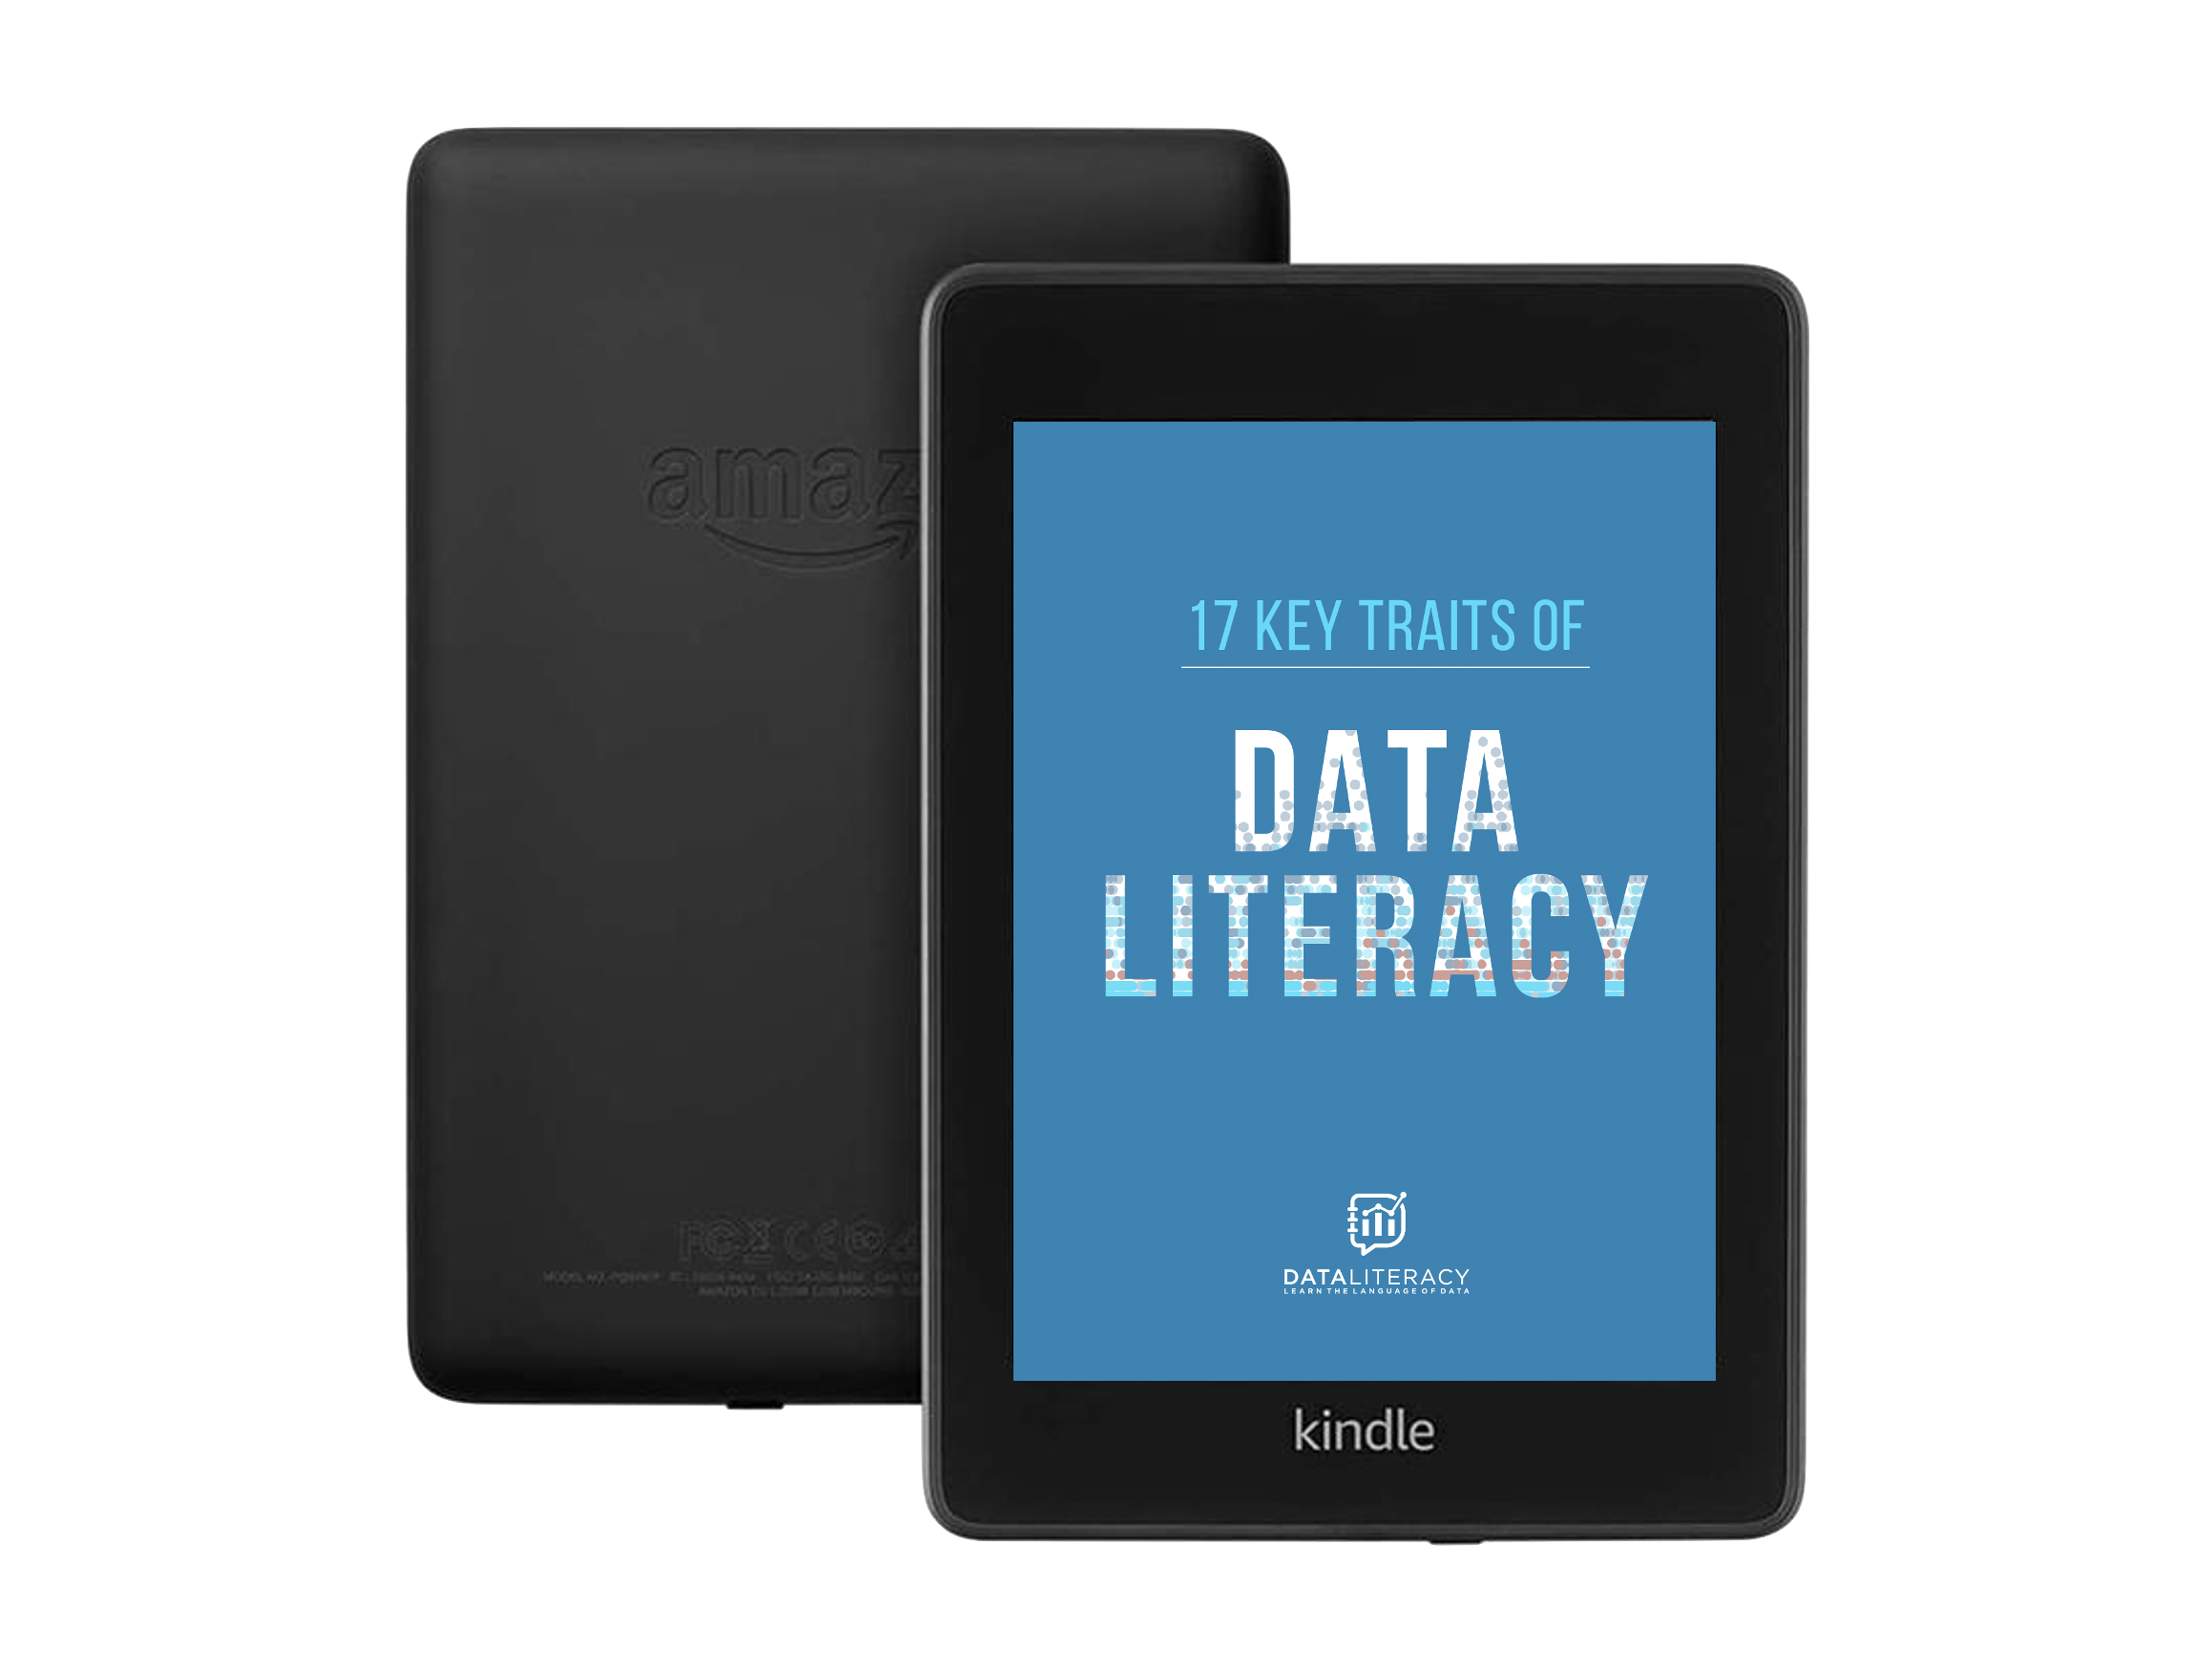 NEW: The ’17 Key Traits of Data Literacy’ Course & Self-Assessment | Data Literacy | Data Literacy  